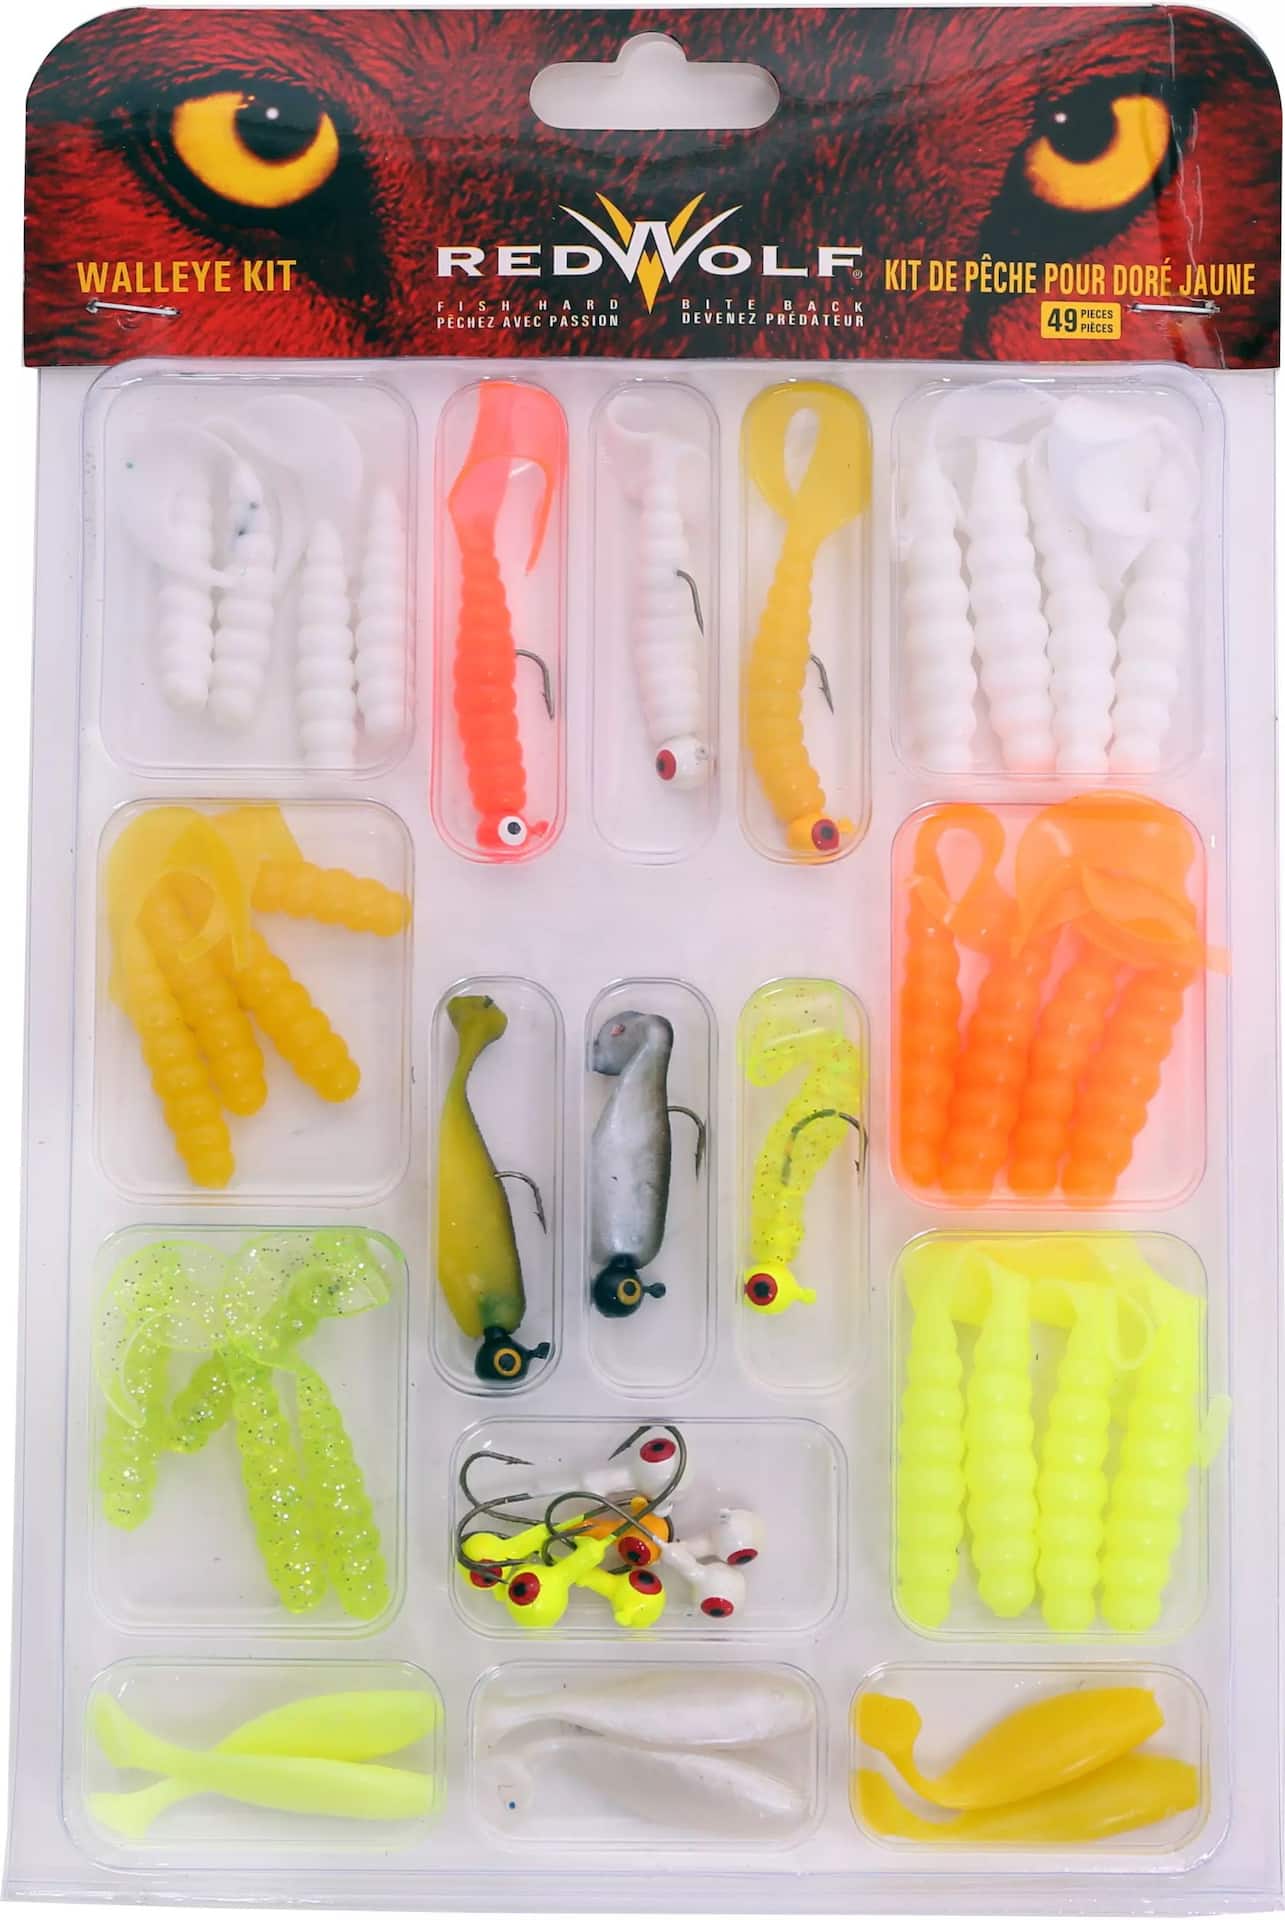 https://media-www.canadiantire.ca/product/playing/fishing/fishing-lures/0777763/red-wolf-walleye-kit-49-piece-248df284-fbec-4039-97d7-e8394209babf-jpgrendition.jpg